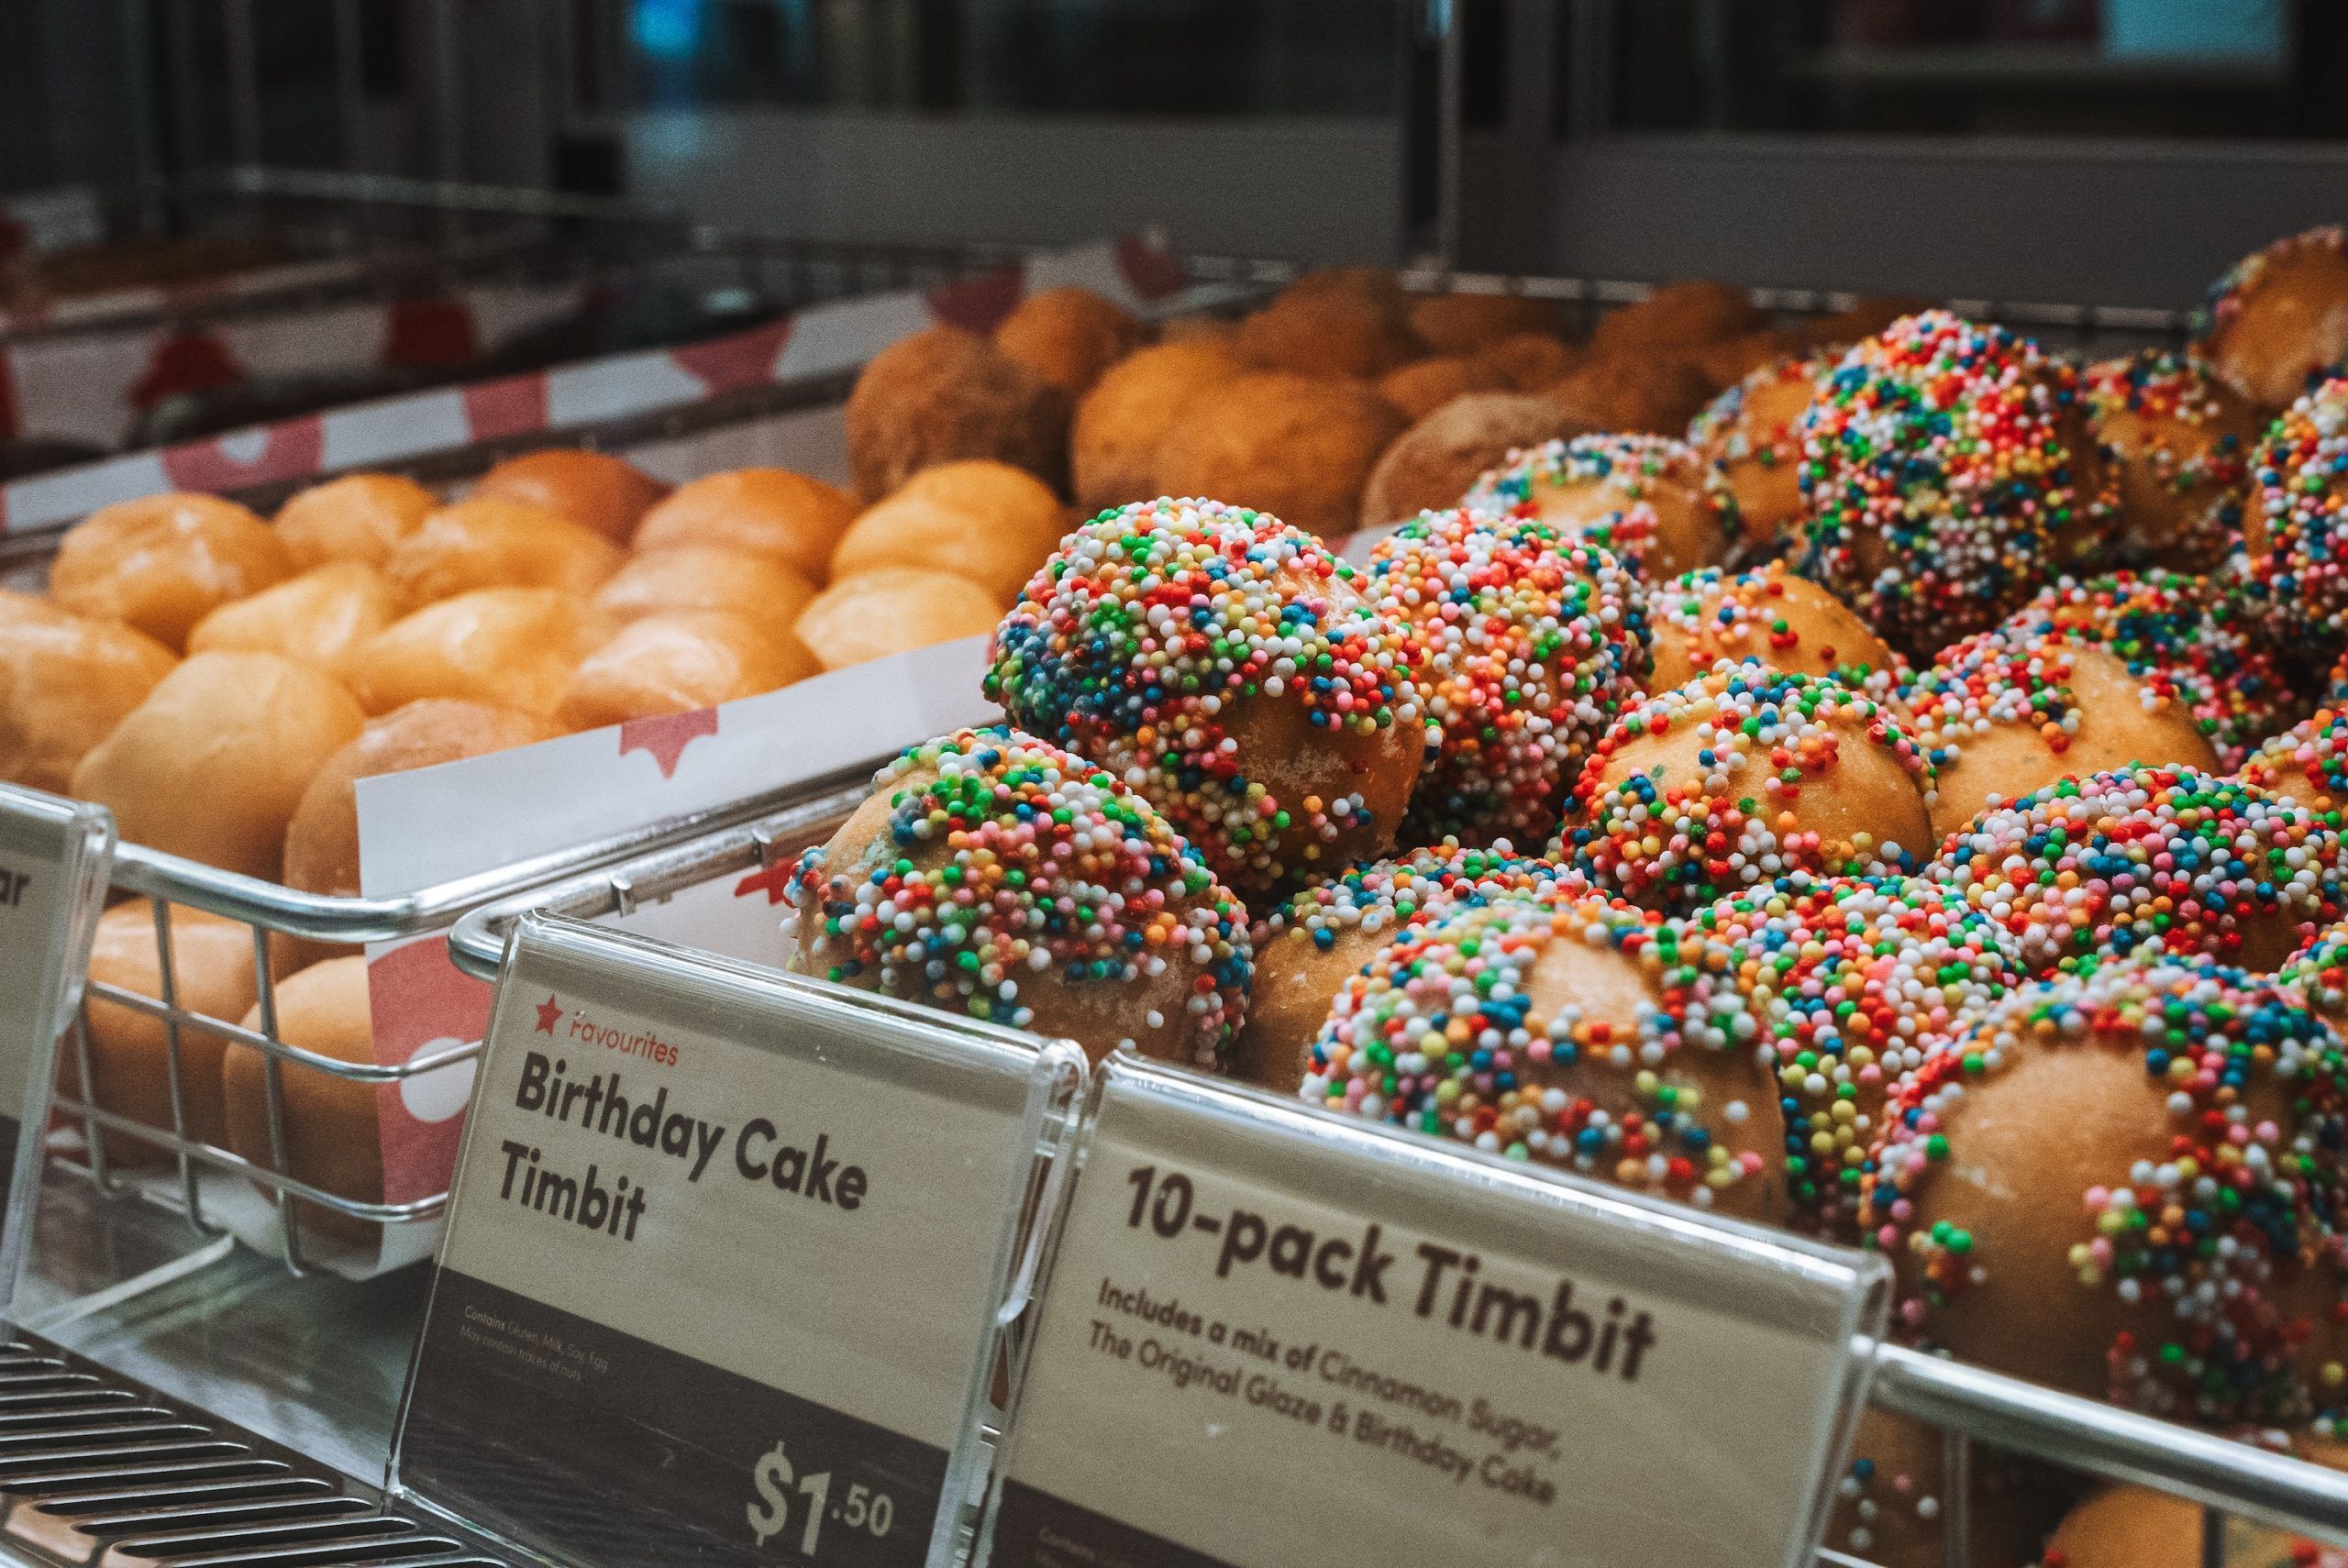 Tim Hortons fall menu is out across Canada & here's what's new